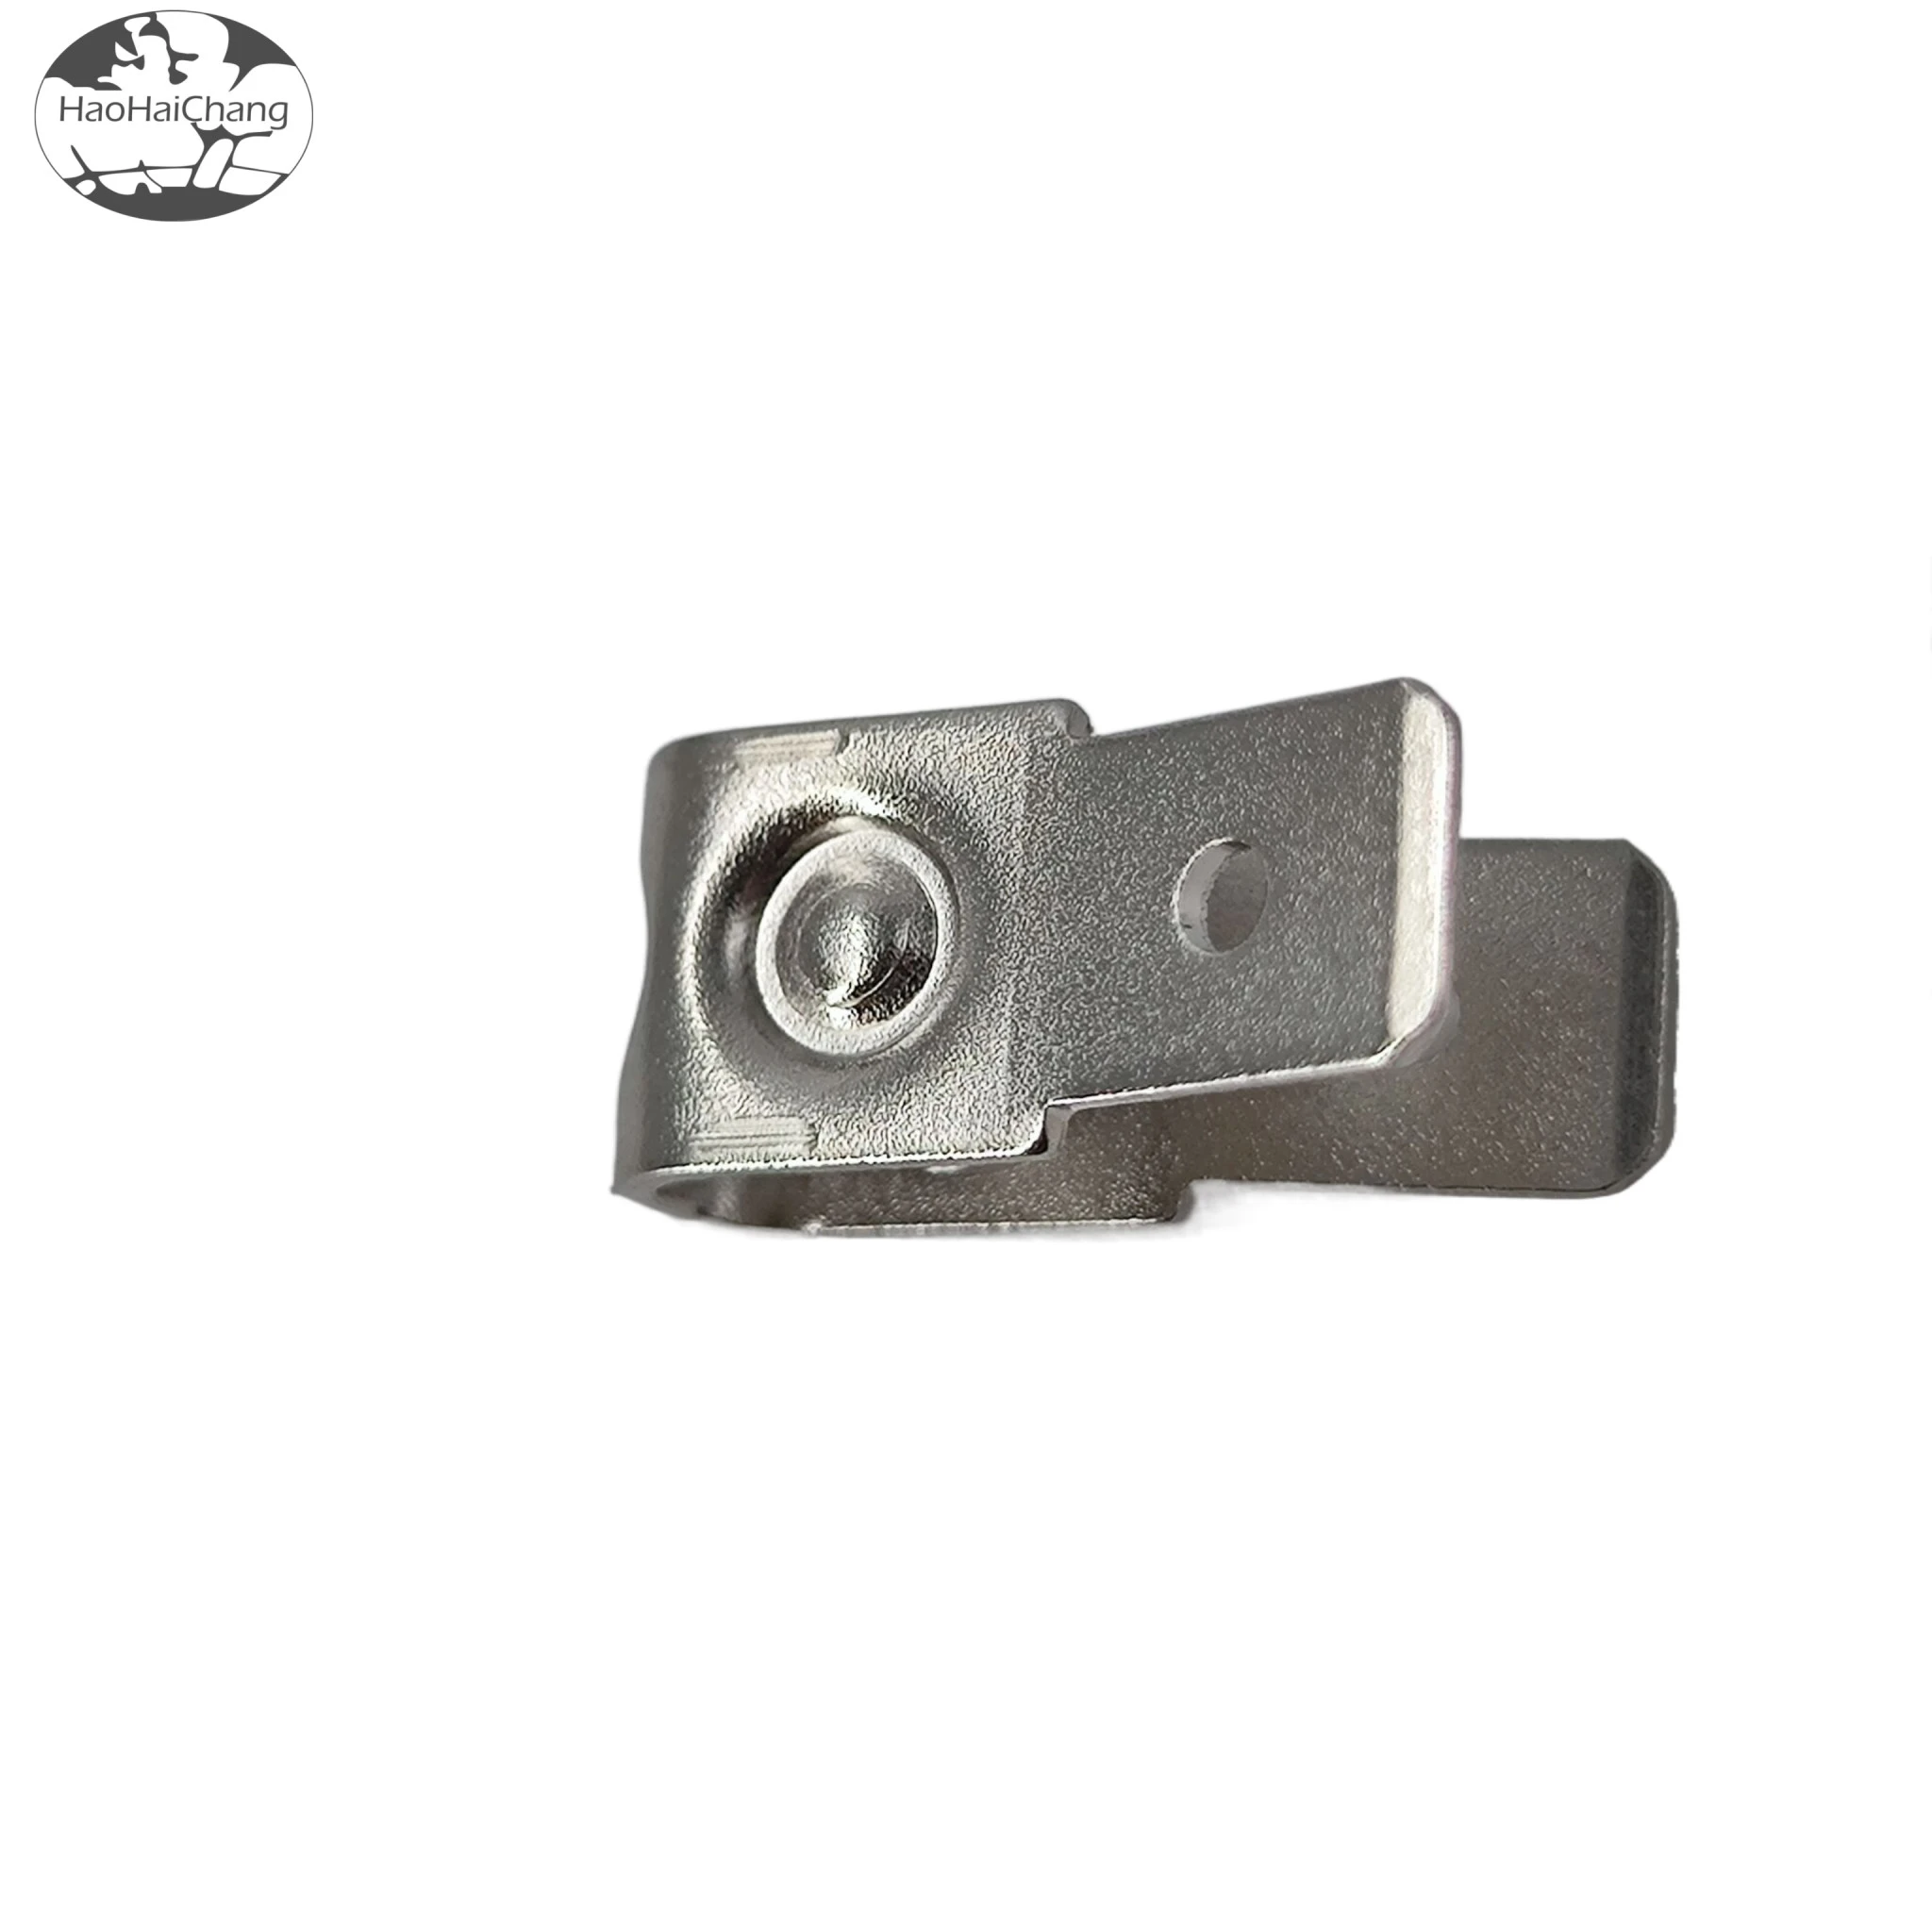 HHC-0135 Connector